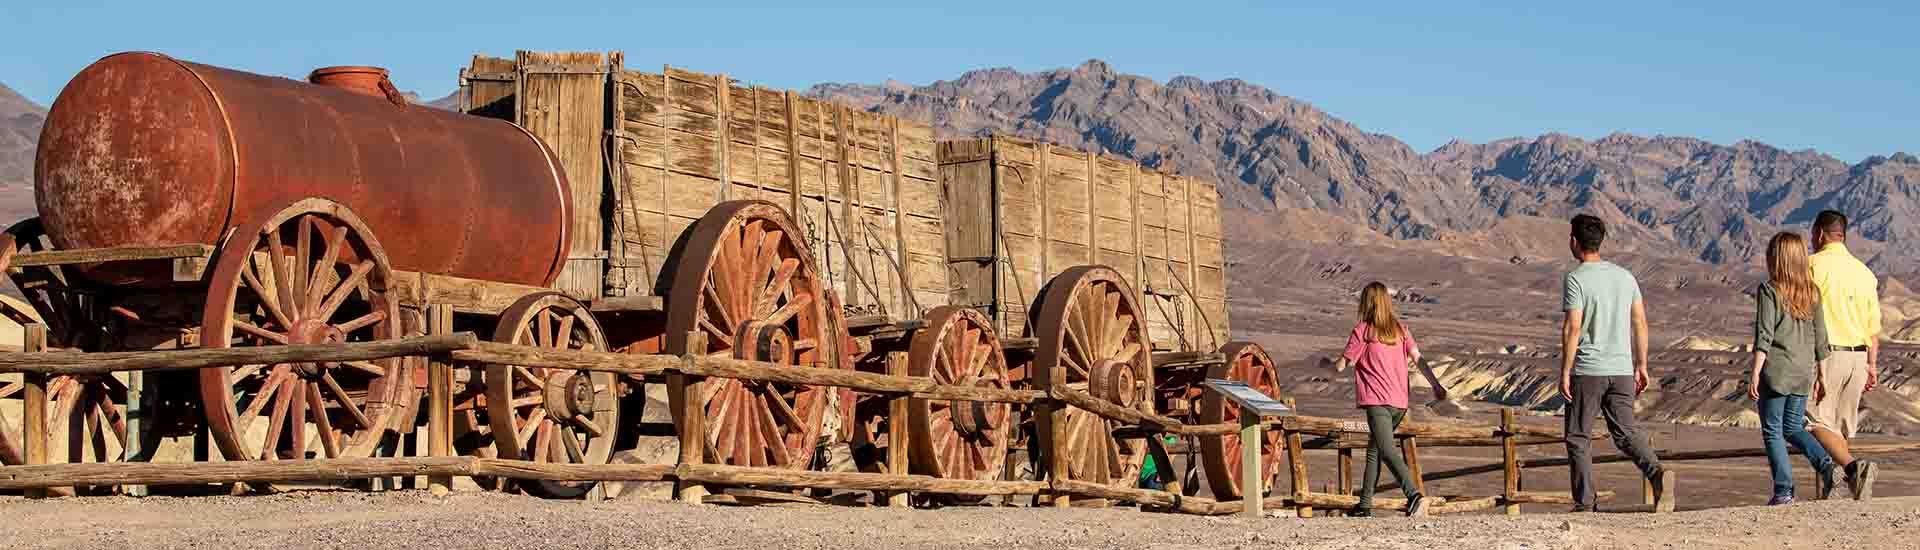 Pink Adventure Tours Death Valley Tour guests walking towards Twenty-Mule Team Wagon, Harmony Borax Works, Death Valley